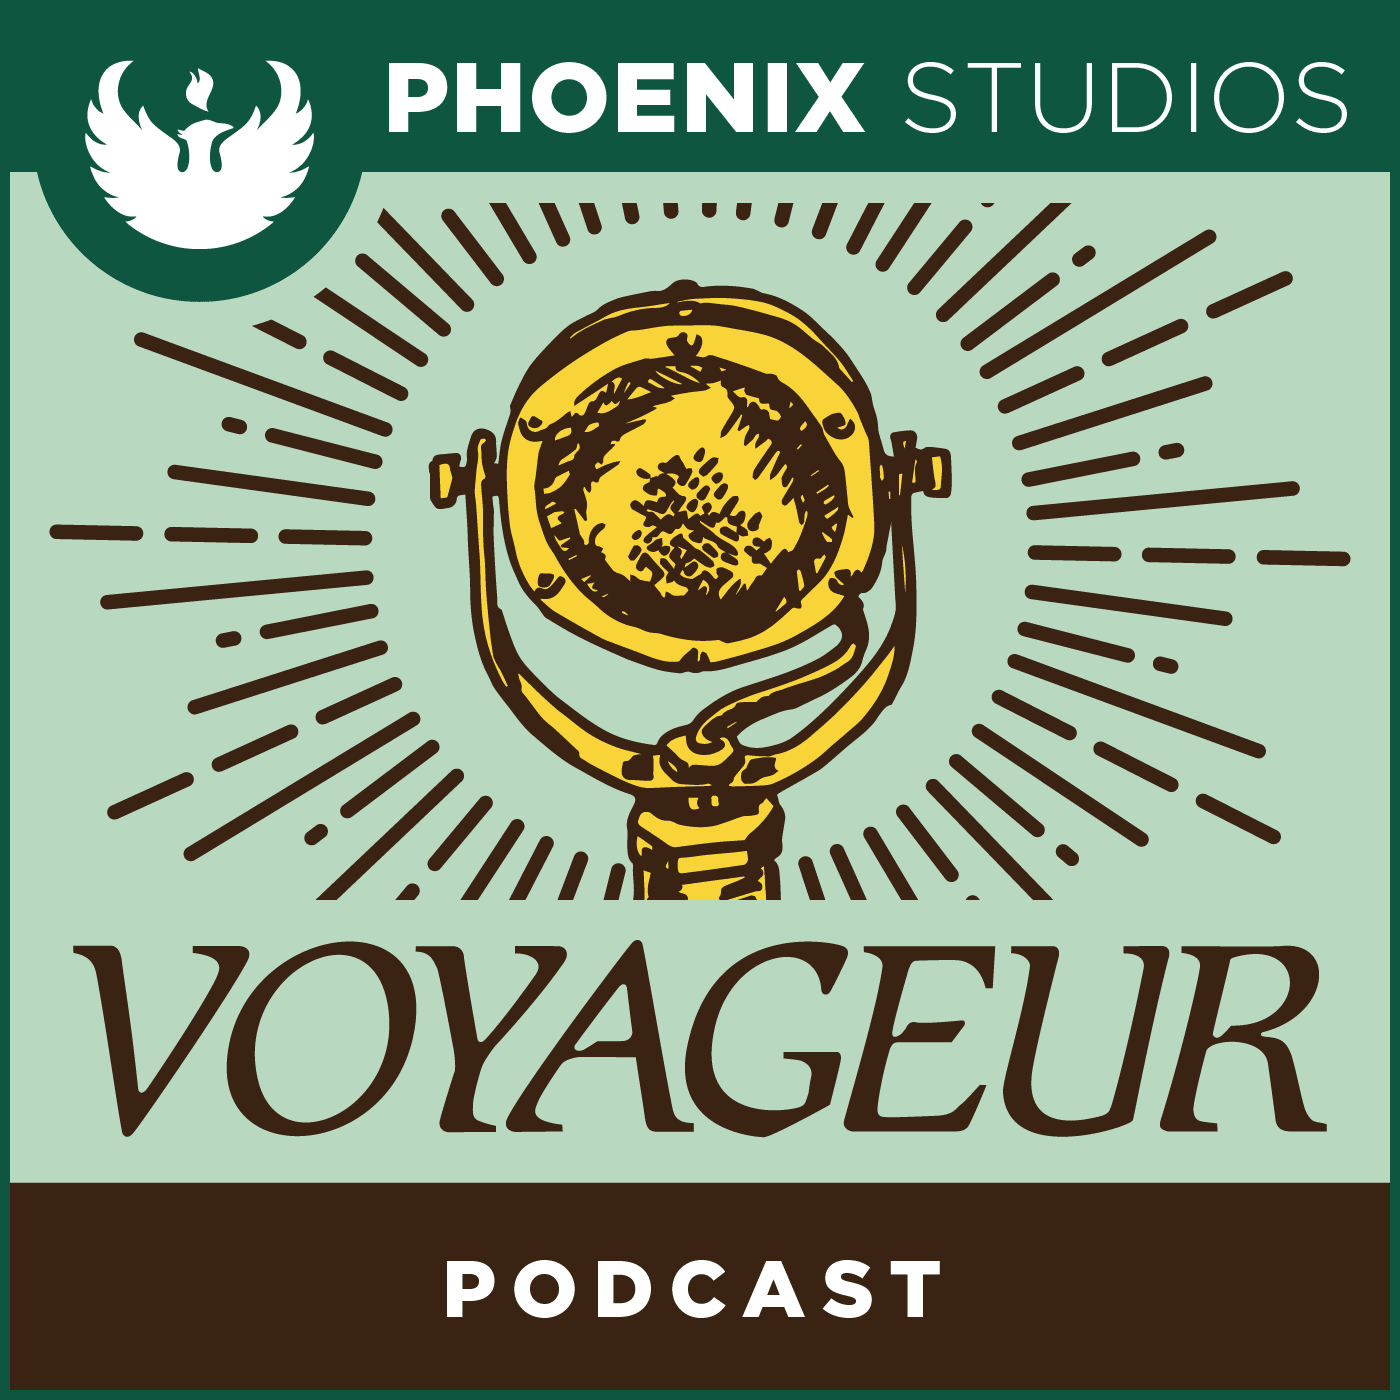 Voyageur: The Podcast - A UWGB Podcast